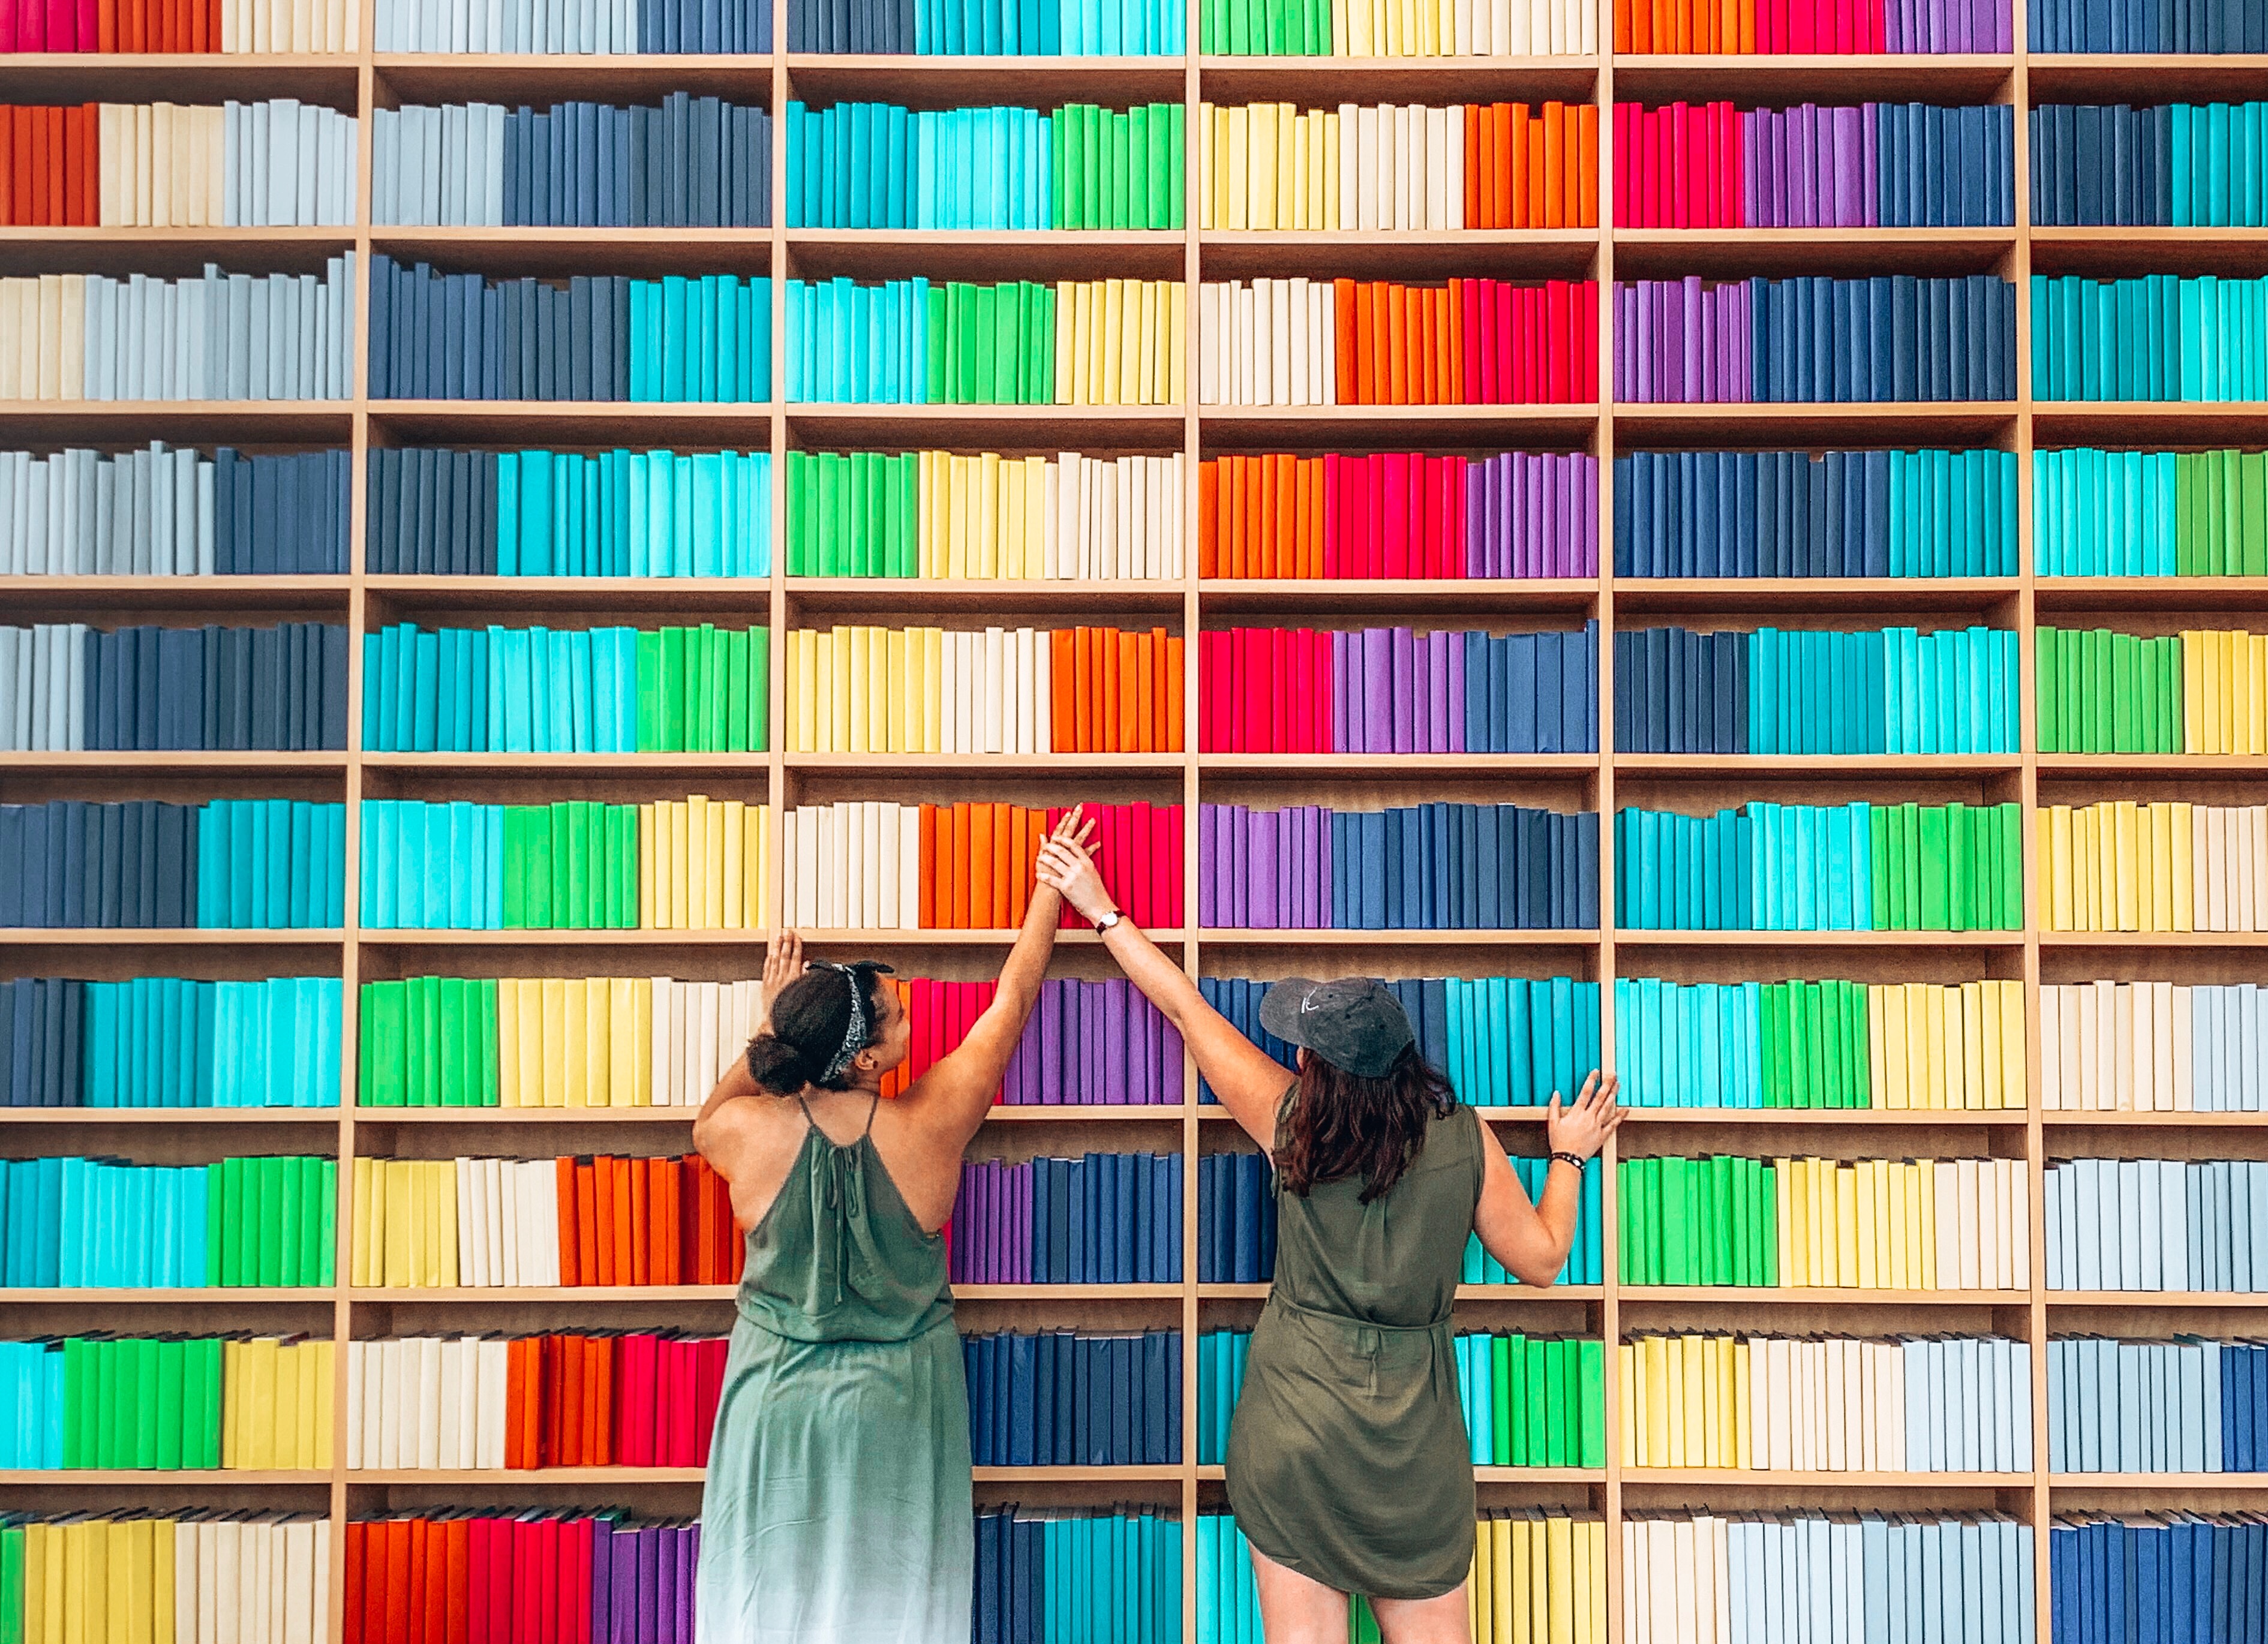 Two girls reaching for a book in front of a large book shelf organised by colour in a rainbow design